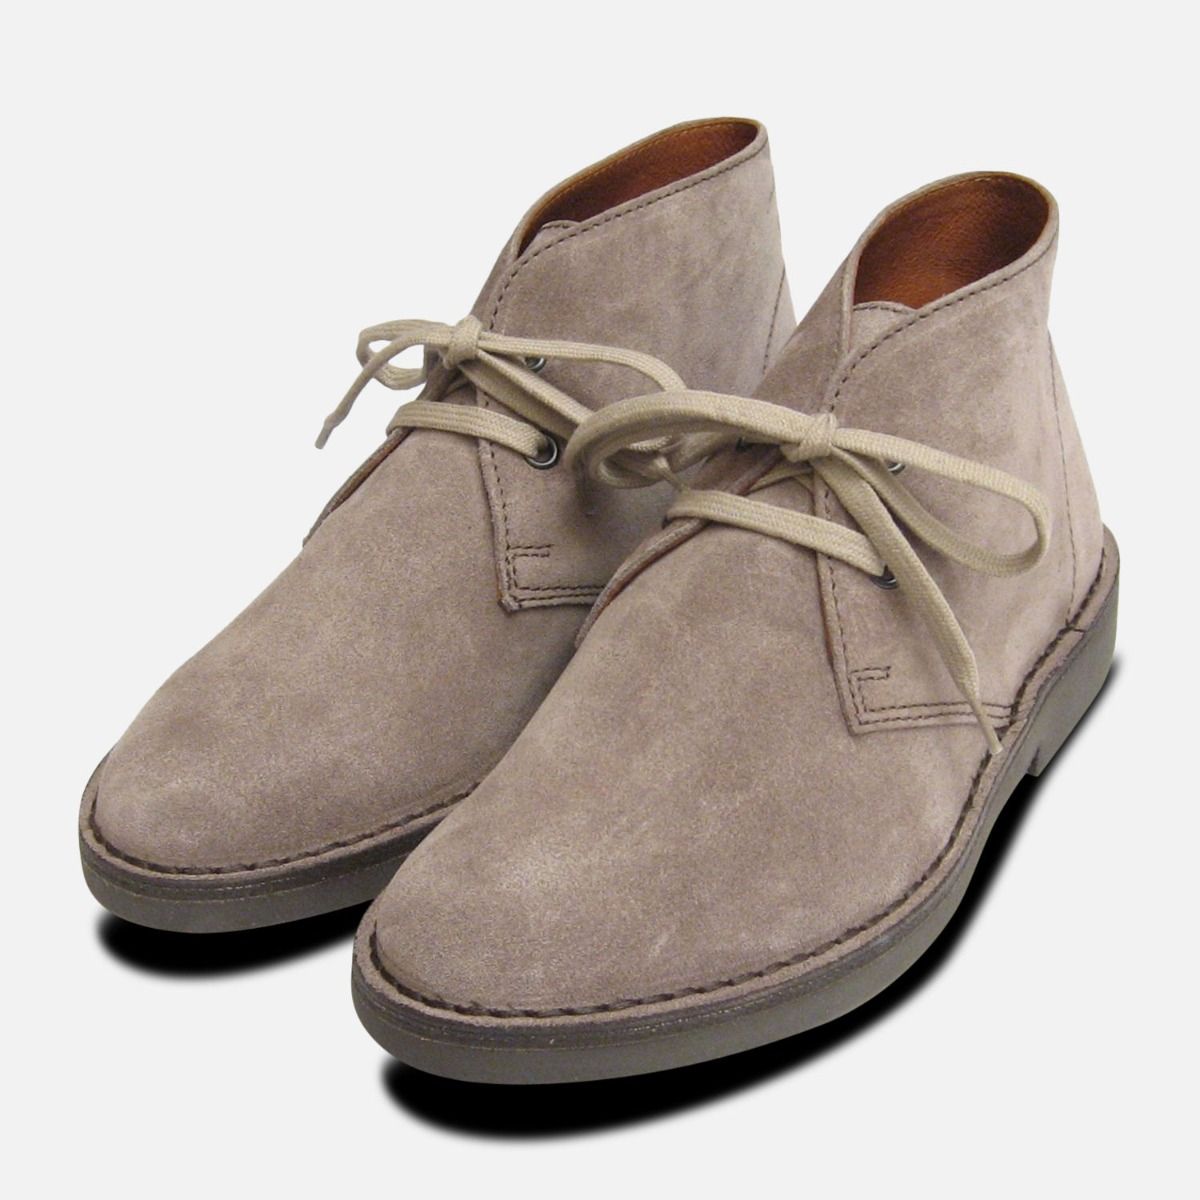 light grey suede boots